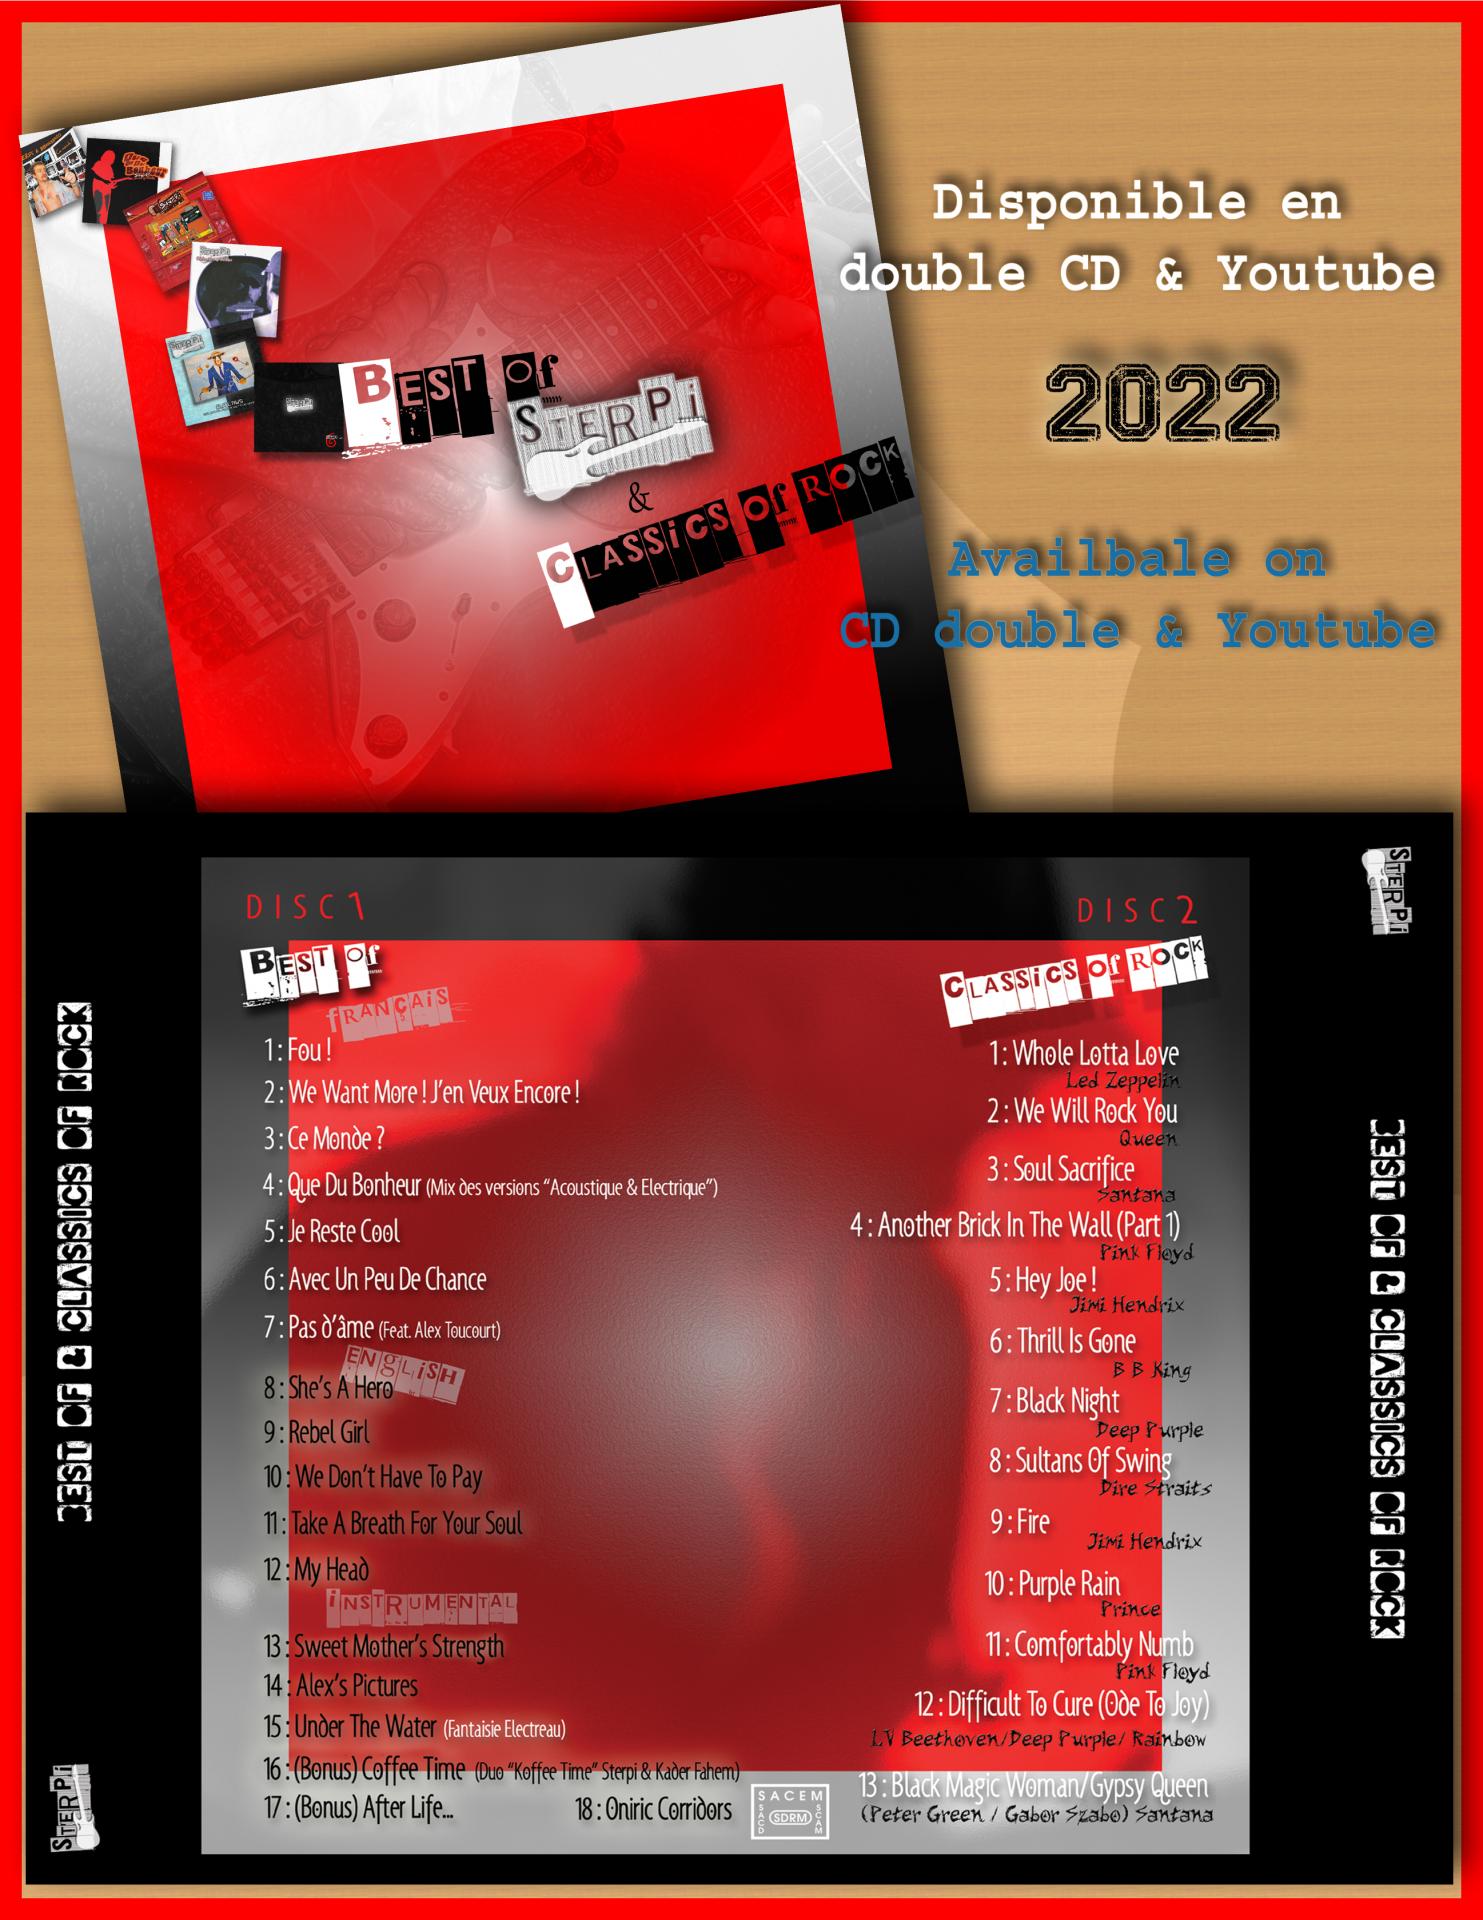 Discographie 2022 best of